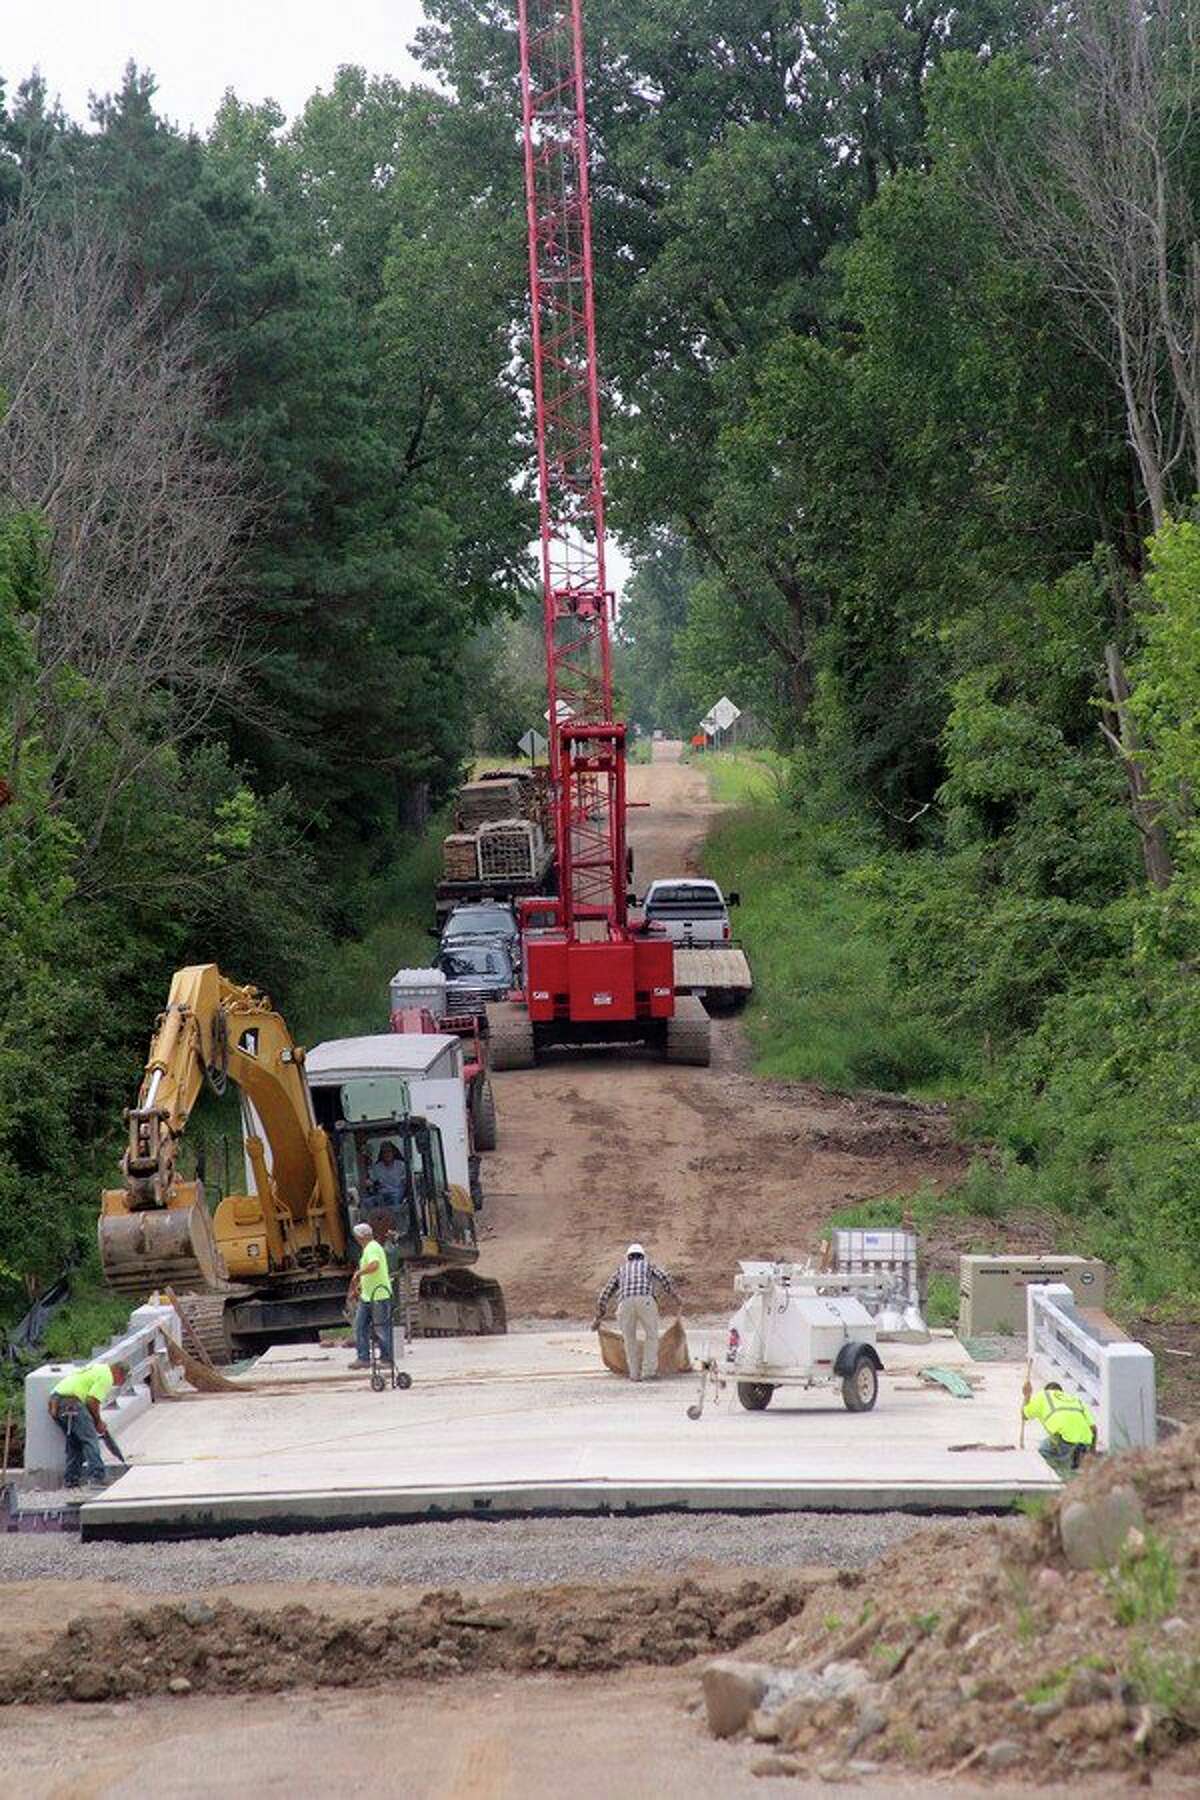 Work on the bridge over the Pigeon River on Blakely Road is nearing completion. The project began in late May, and should be finished in a month to six weeks. (Seth Stapleton/Huron Daily Tribune)